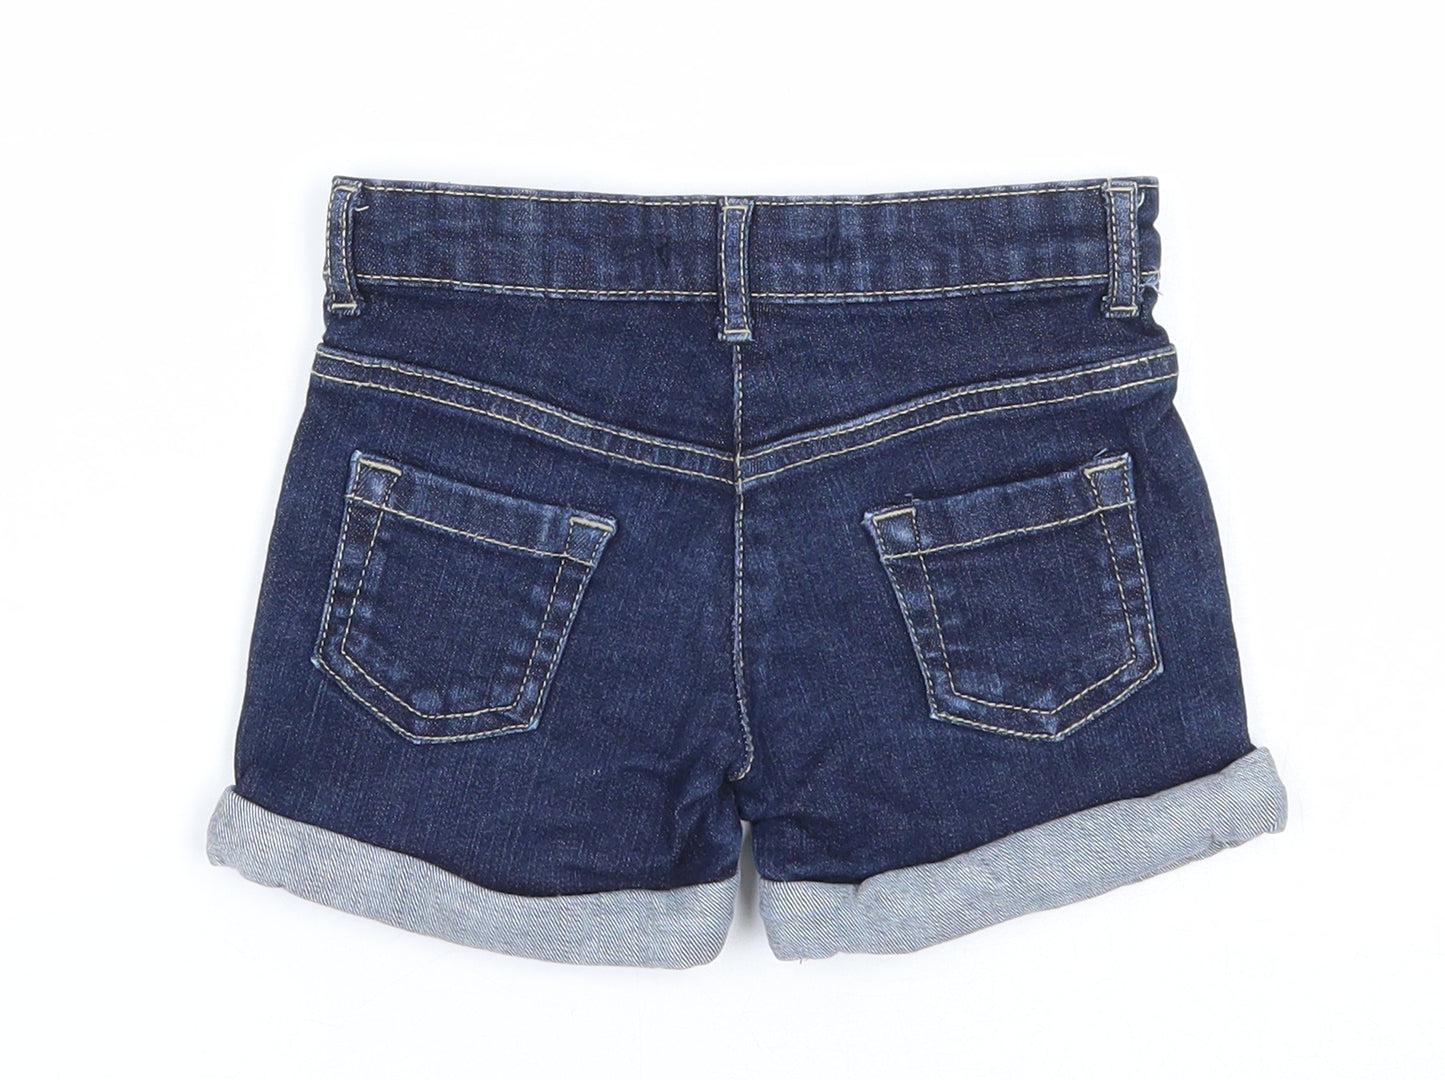 Marks and Spencer Girls Blue Cotton Boyfriend Shorts Size 2-3 Years Regular Snap